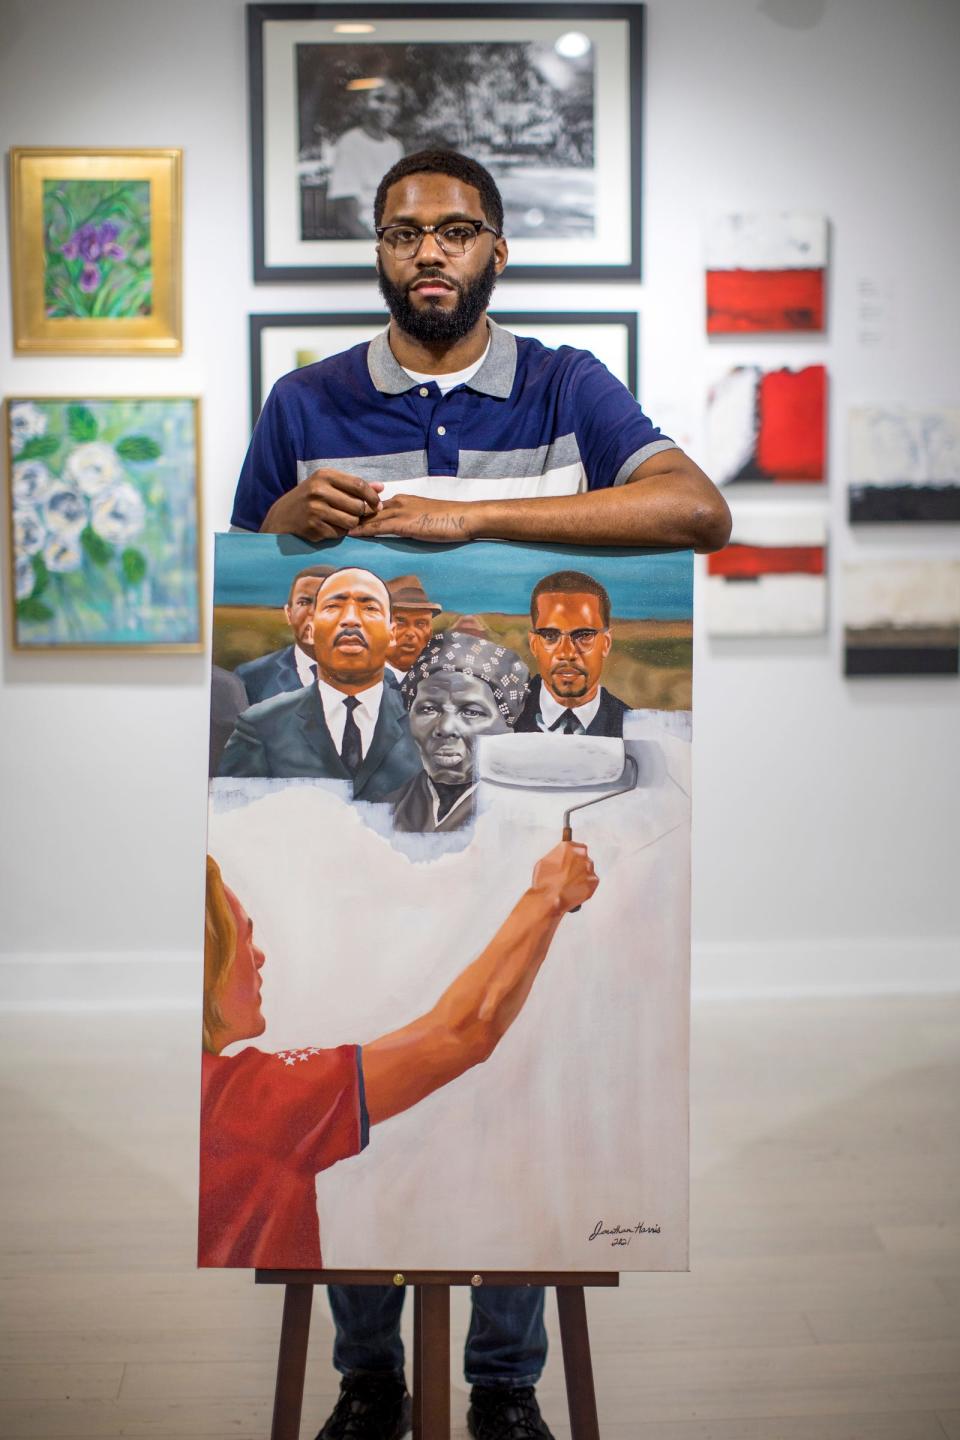 Jonathan Harris stands next to his painting titled, “Critical Race Theory” at Irwin House Gallery in Detroit on Thursday, Dec. 2, 2021. Harris recently had an art show titled TRIPTYCH: Stronger Together introducing artists Crystal Starks-Webb and Terrell Anglin at Irwin House Gallery.